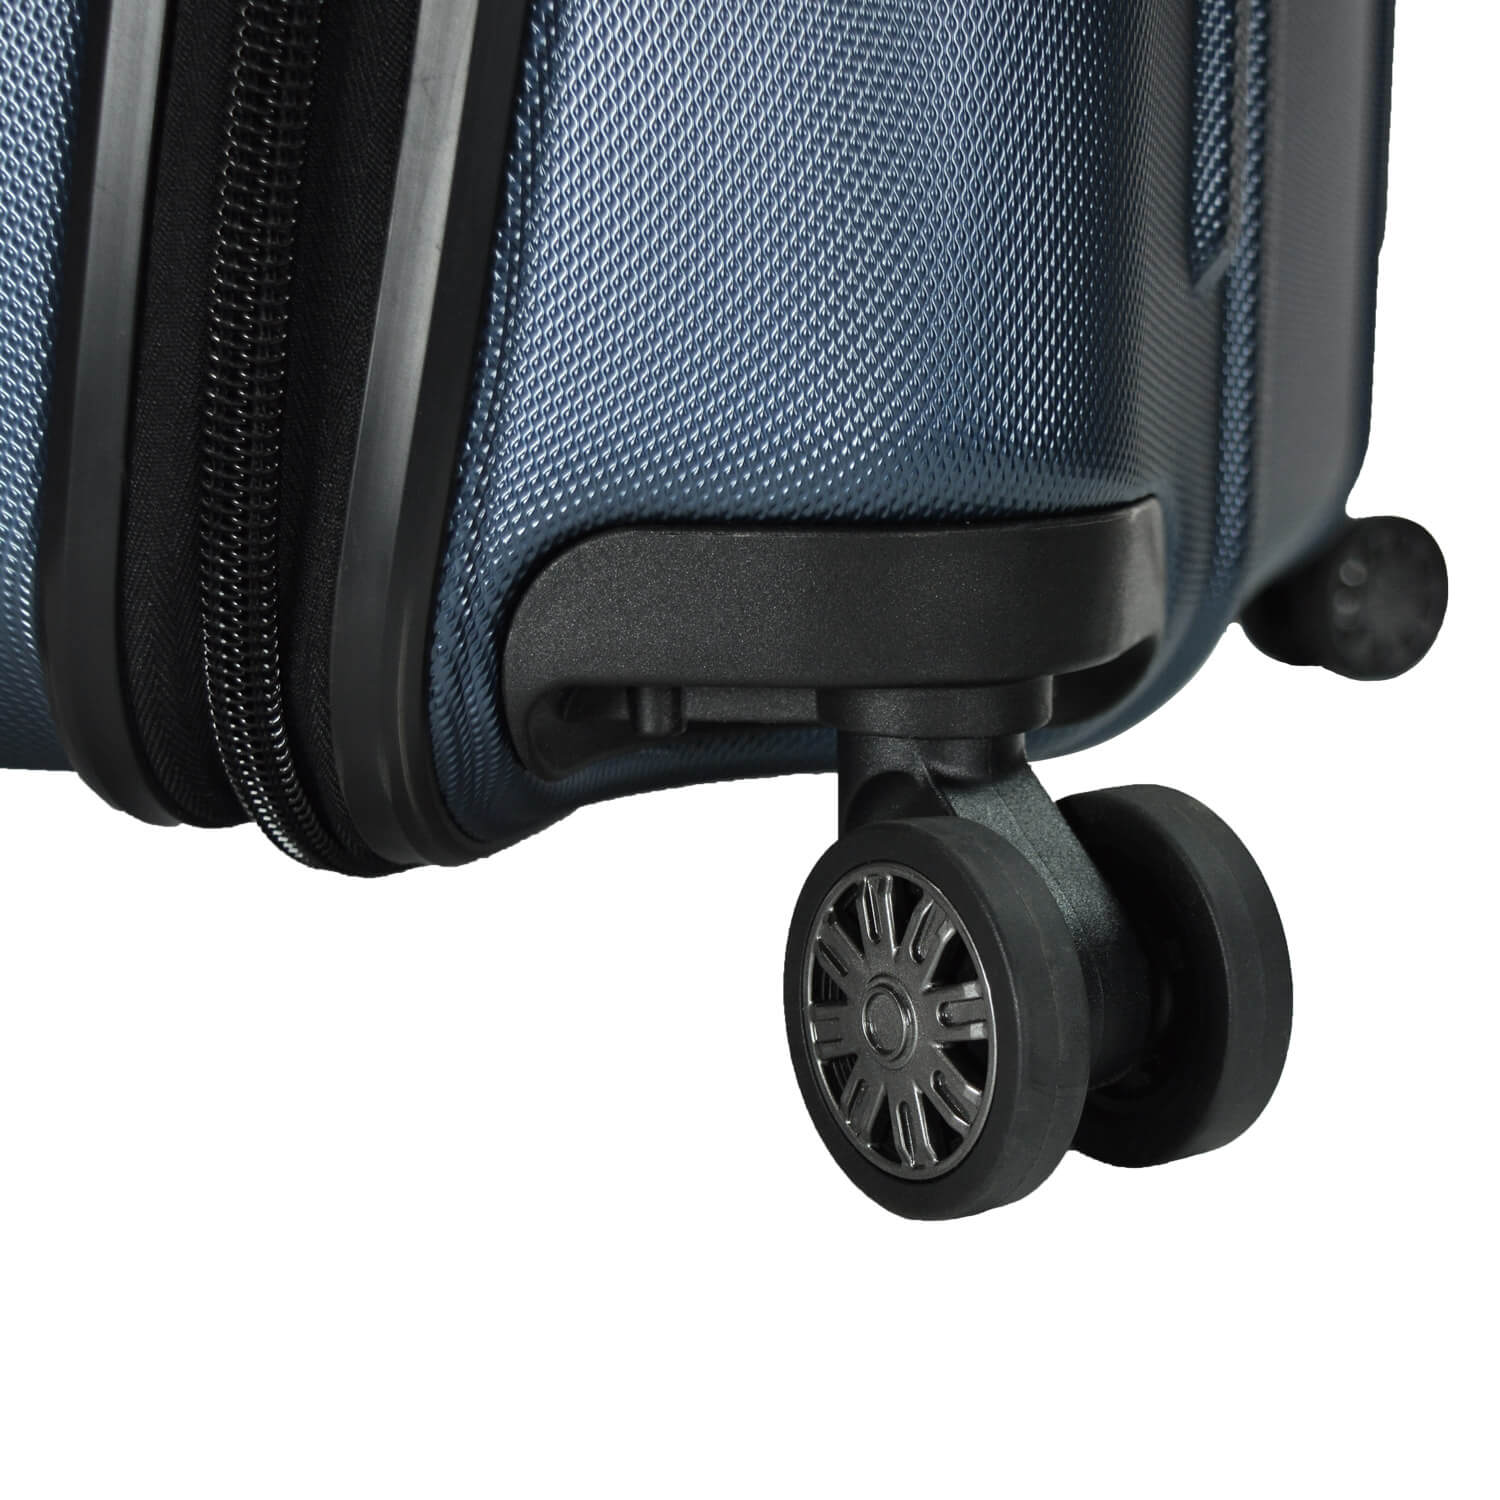 An image of a blue luggage with black wheels.